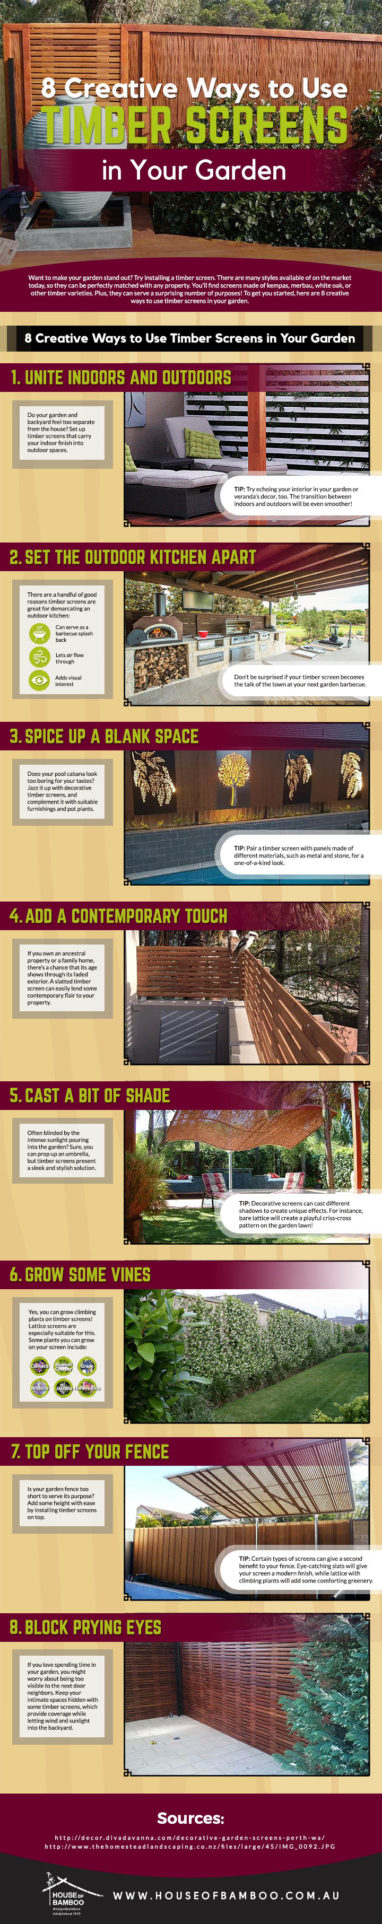 8 Creative Ways to Use Timber Screens in Your Garden